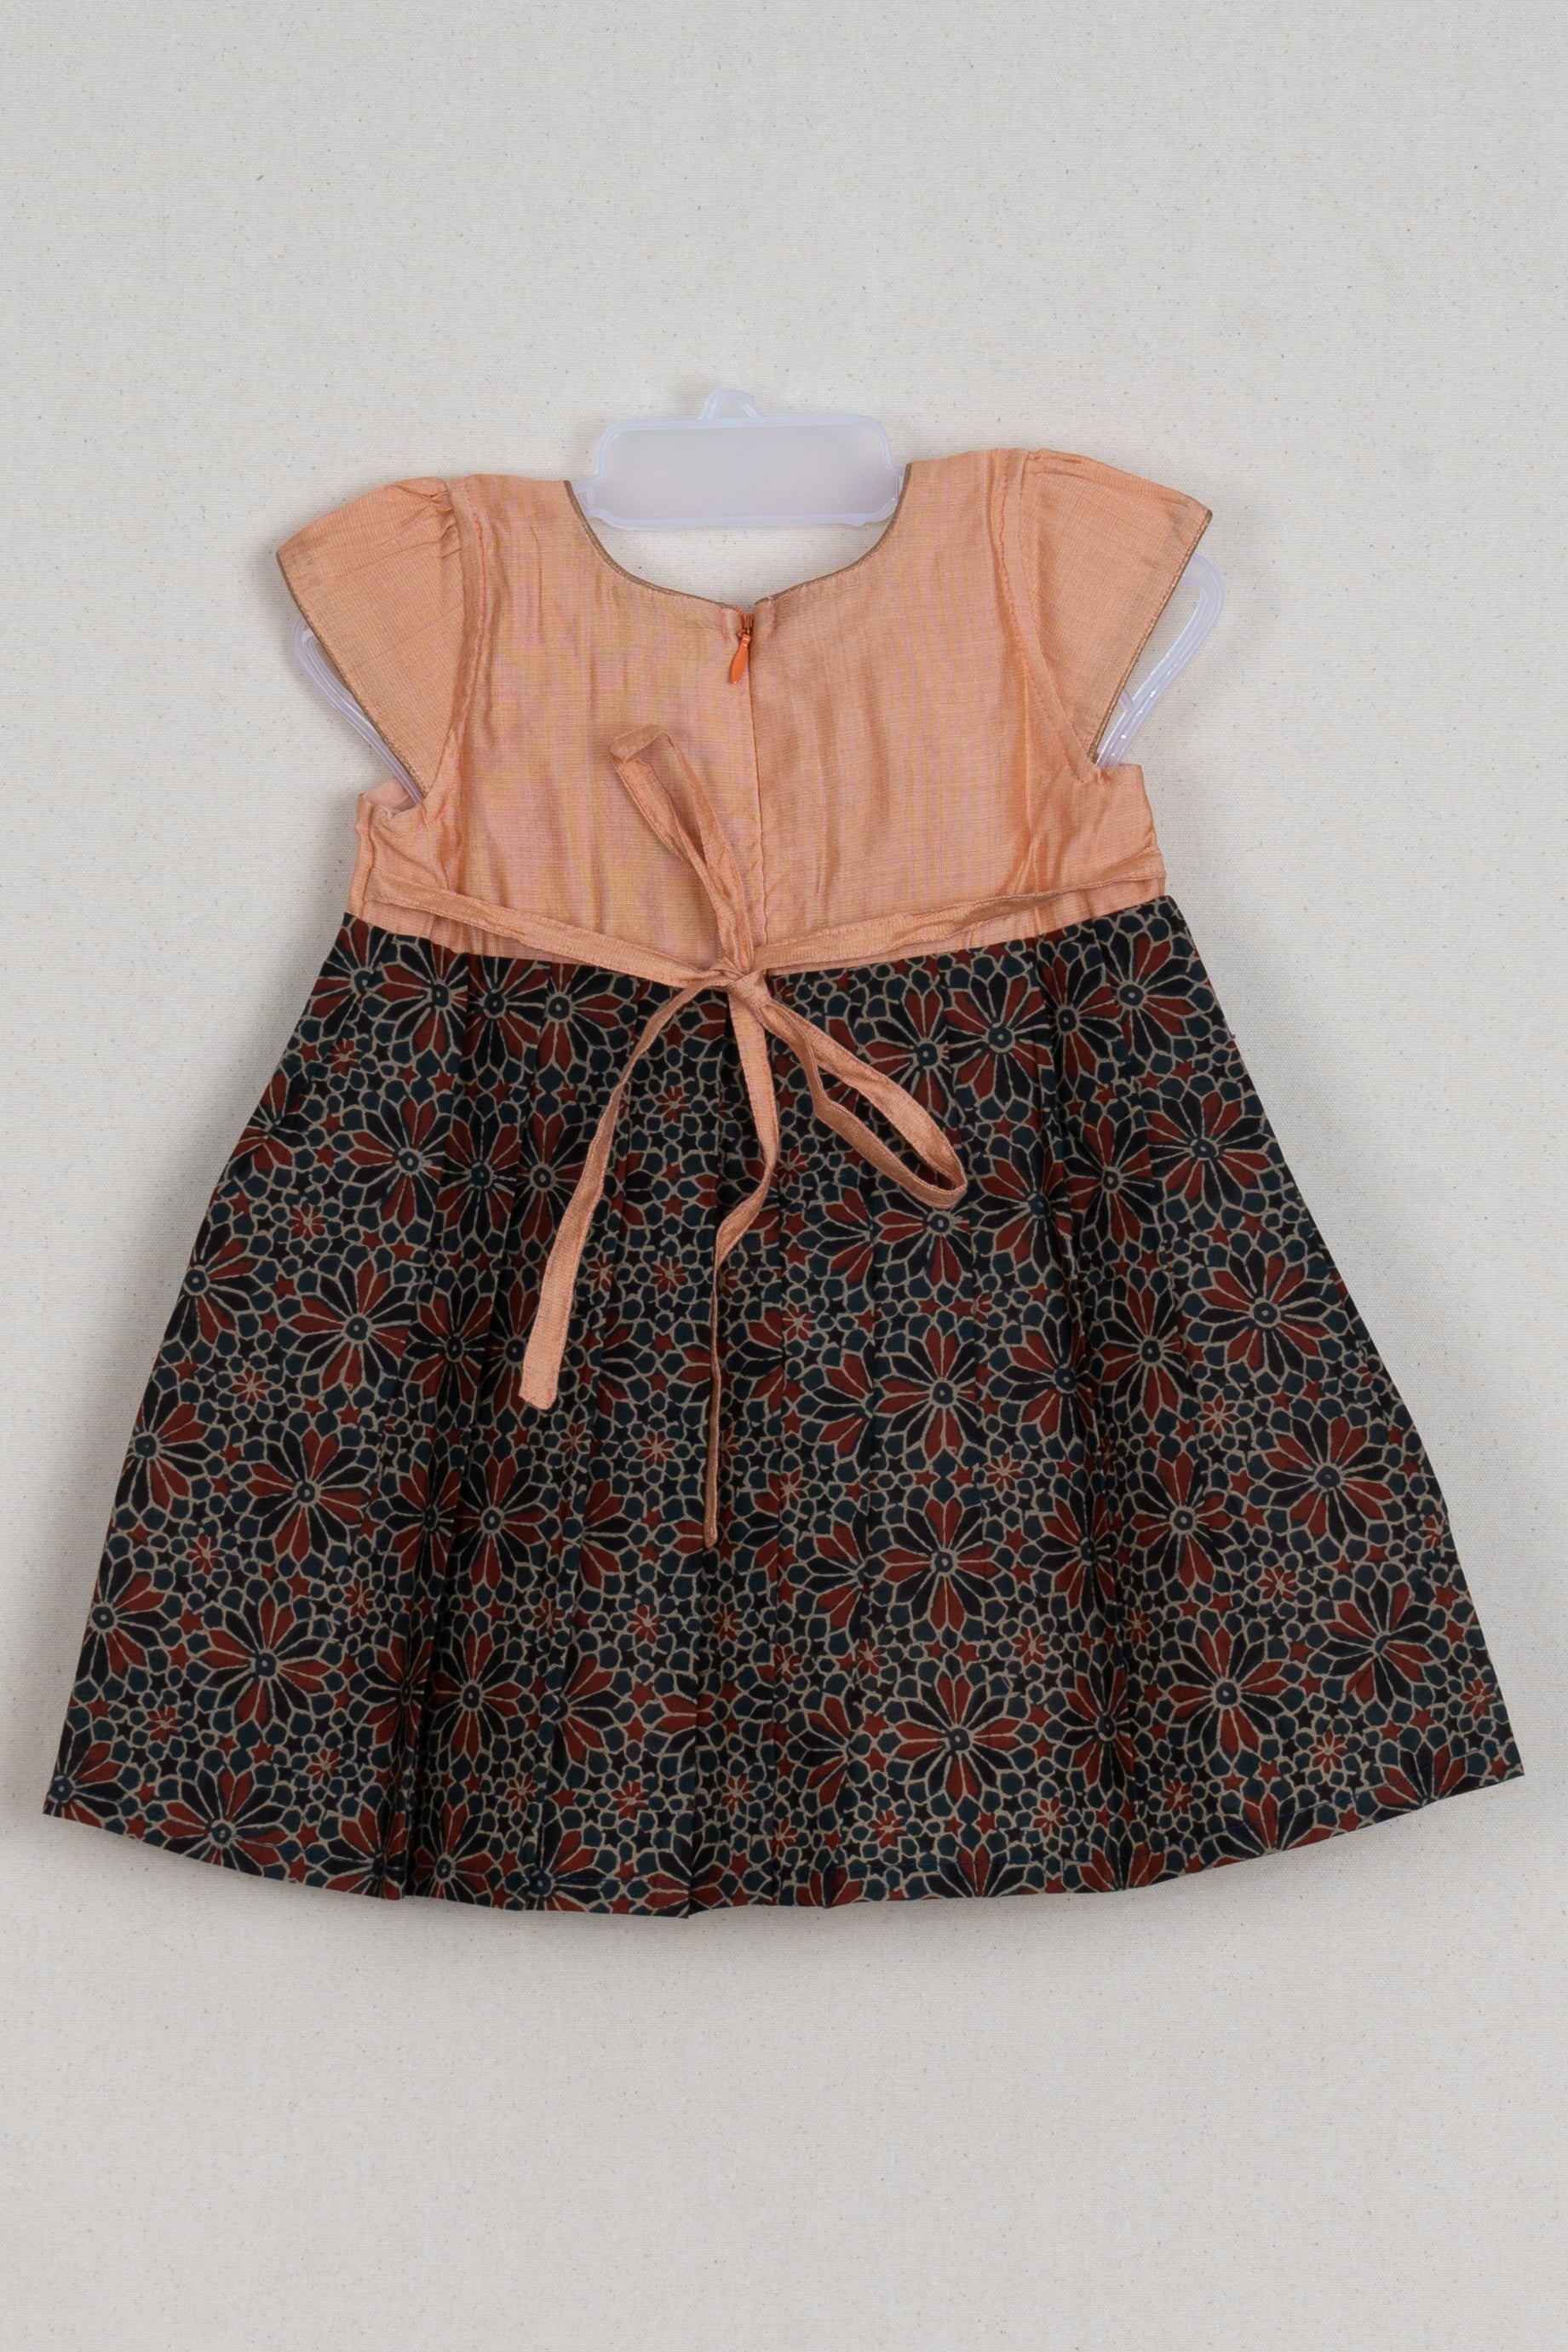 Party Dress for Girls I Beautiful Dress for Baby Girl | Shop Now